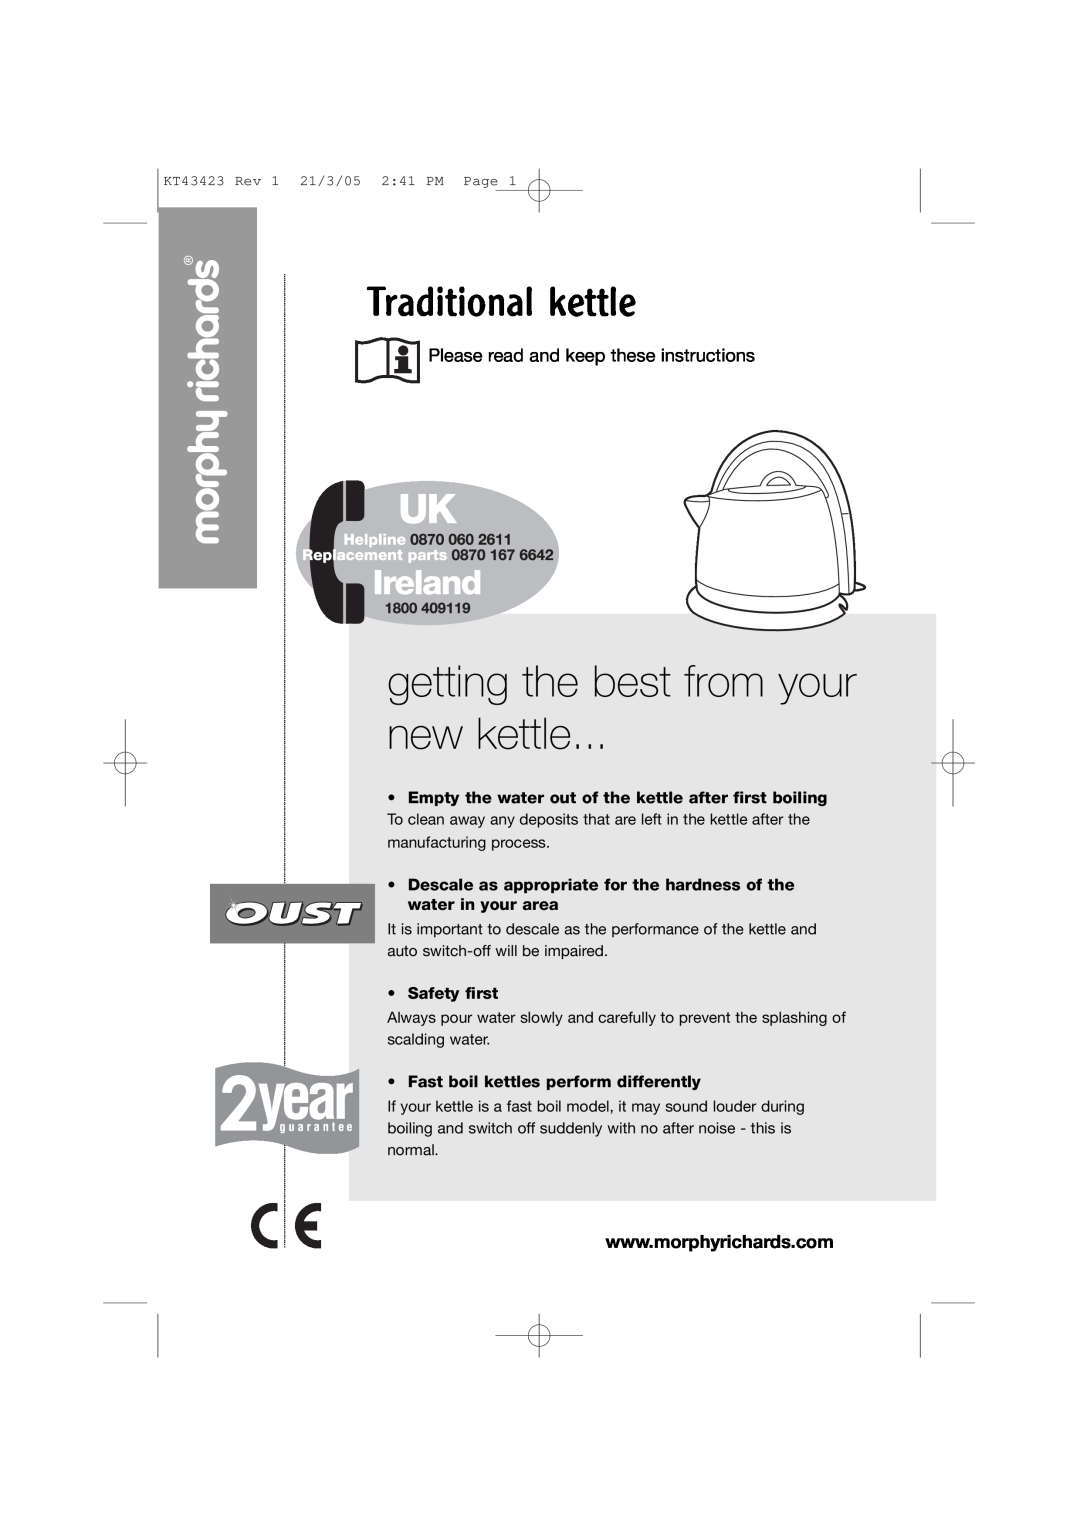 Morphy Richards Kettle manual Traditional kettle, getting the best from your new kettle, Safety first 